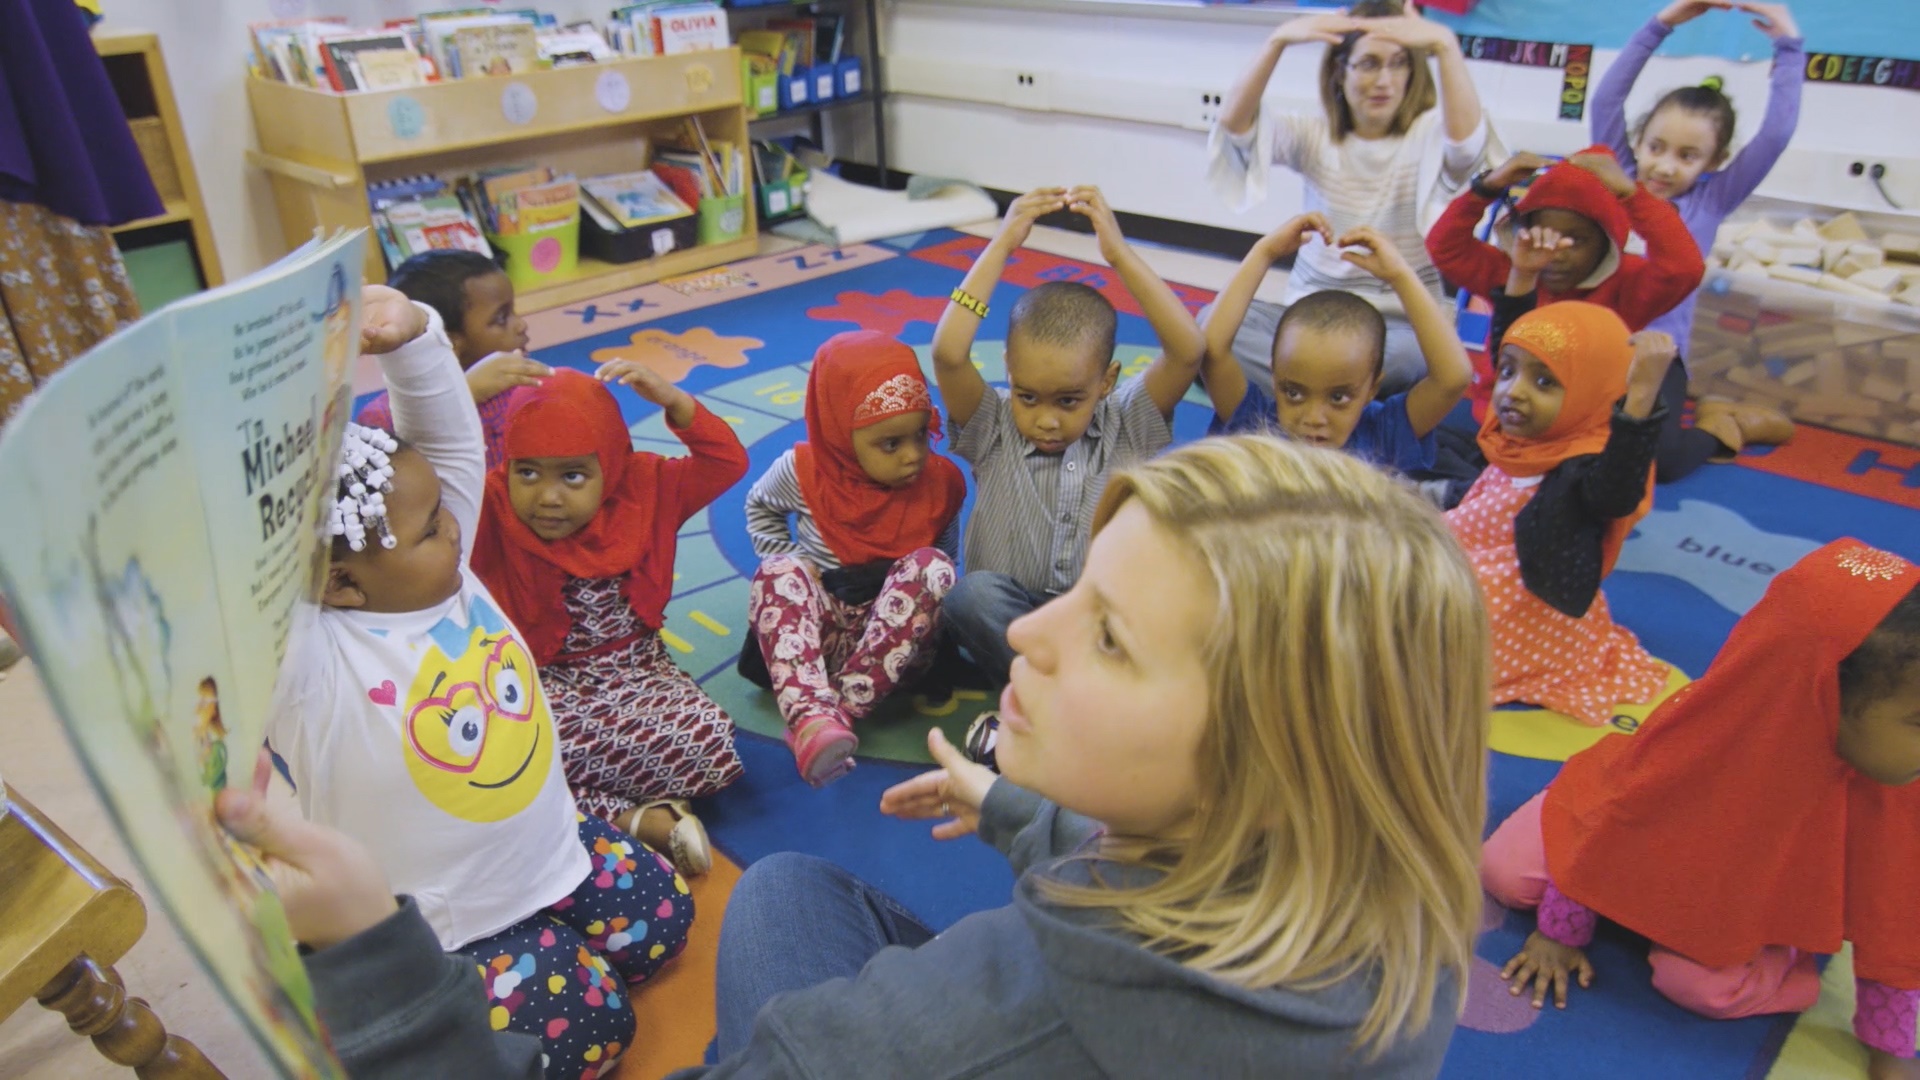 A day care teacher reads a book to 10 diverse preschool children. Another teacher puts her arms above her head with the children. They are all sitting on a colorful rug. Behind them is a bin of books and a bin of wooden blocks.